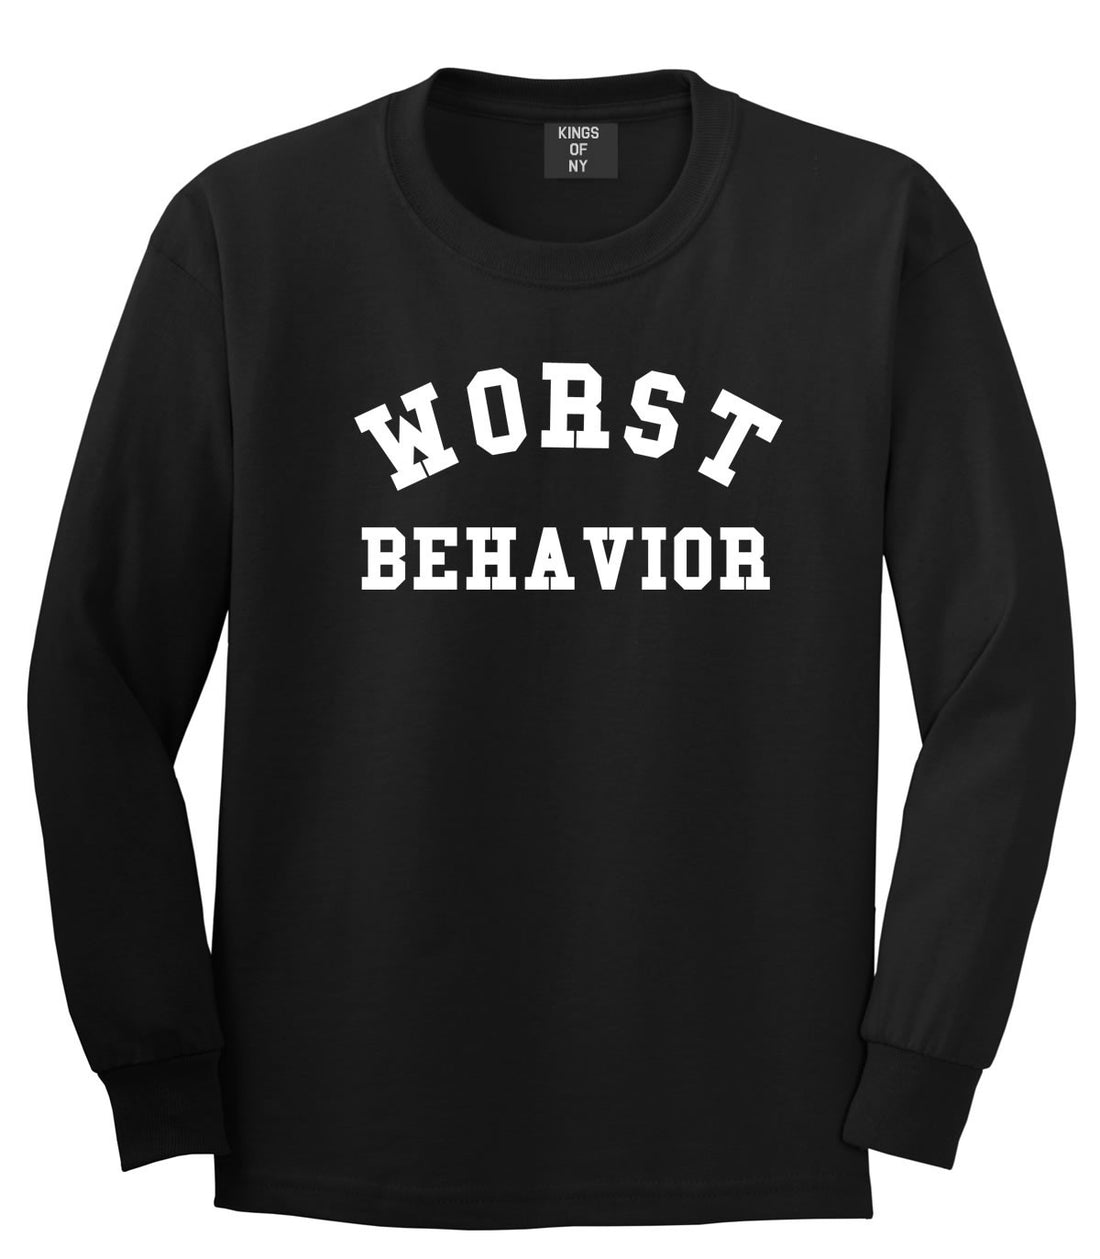 Worst Behavior Long Sleeve T-Shirt in Black by Kings Of NY